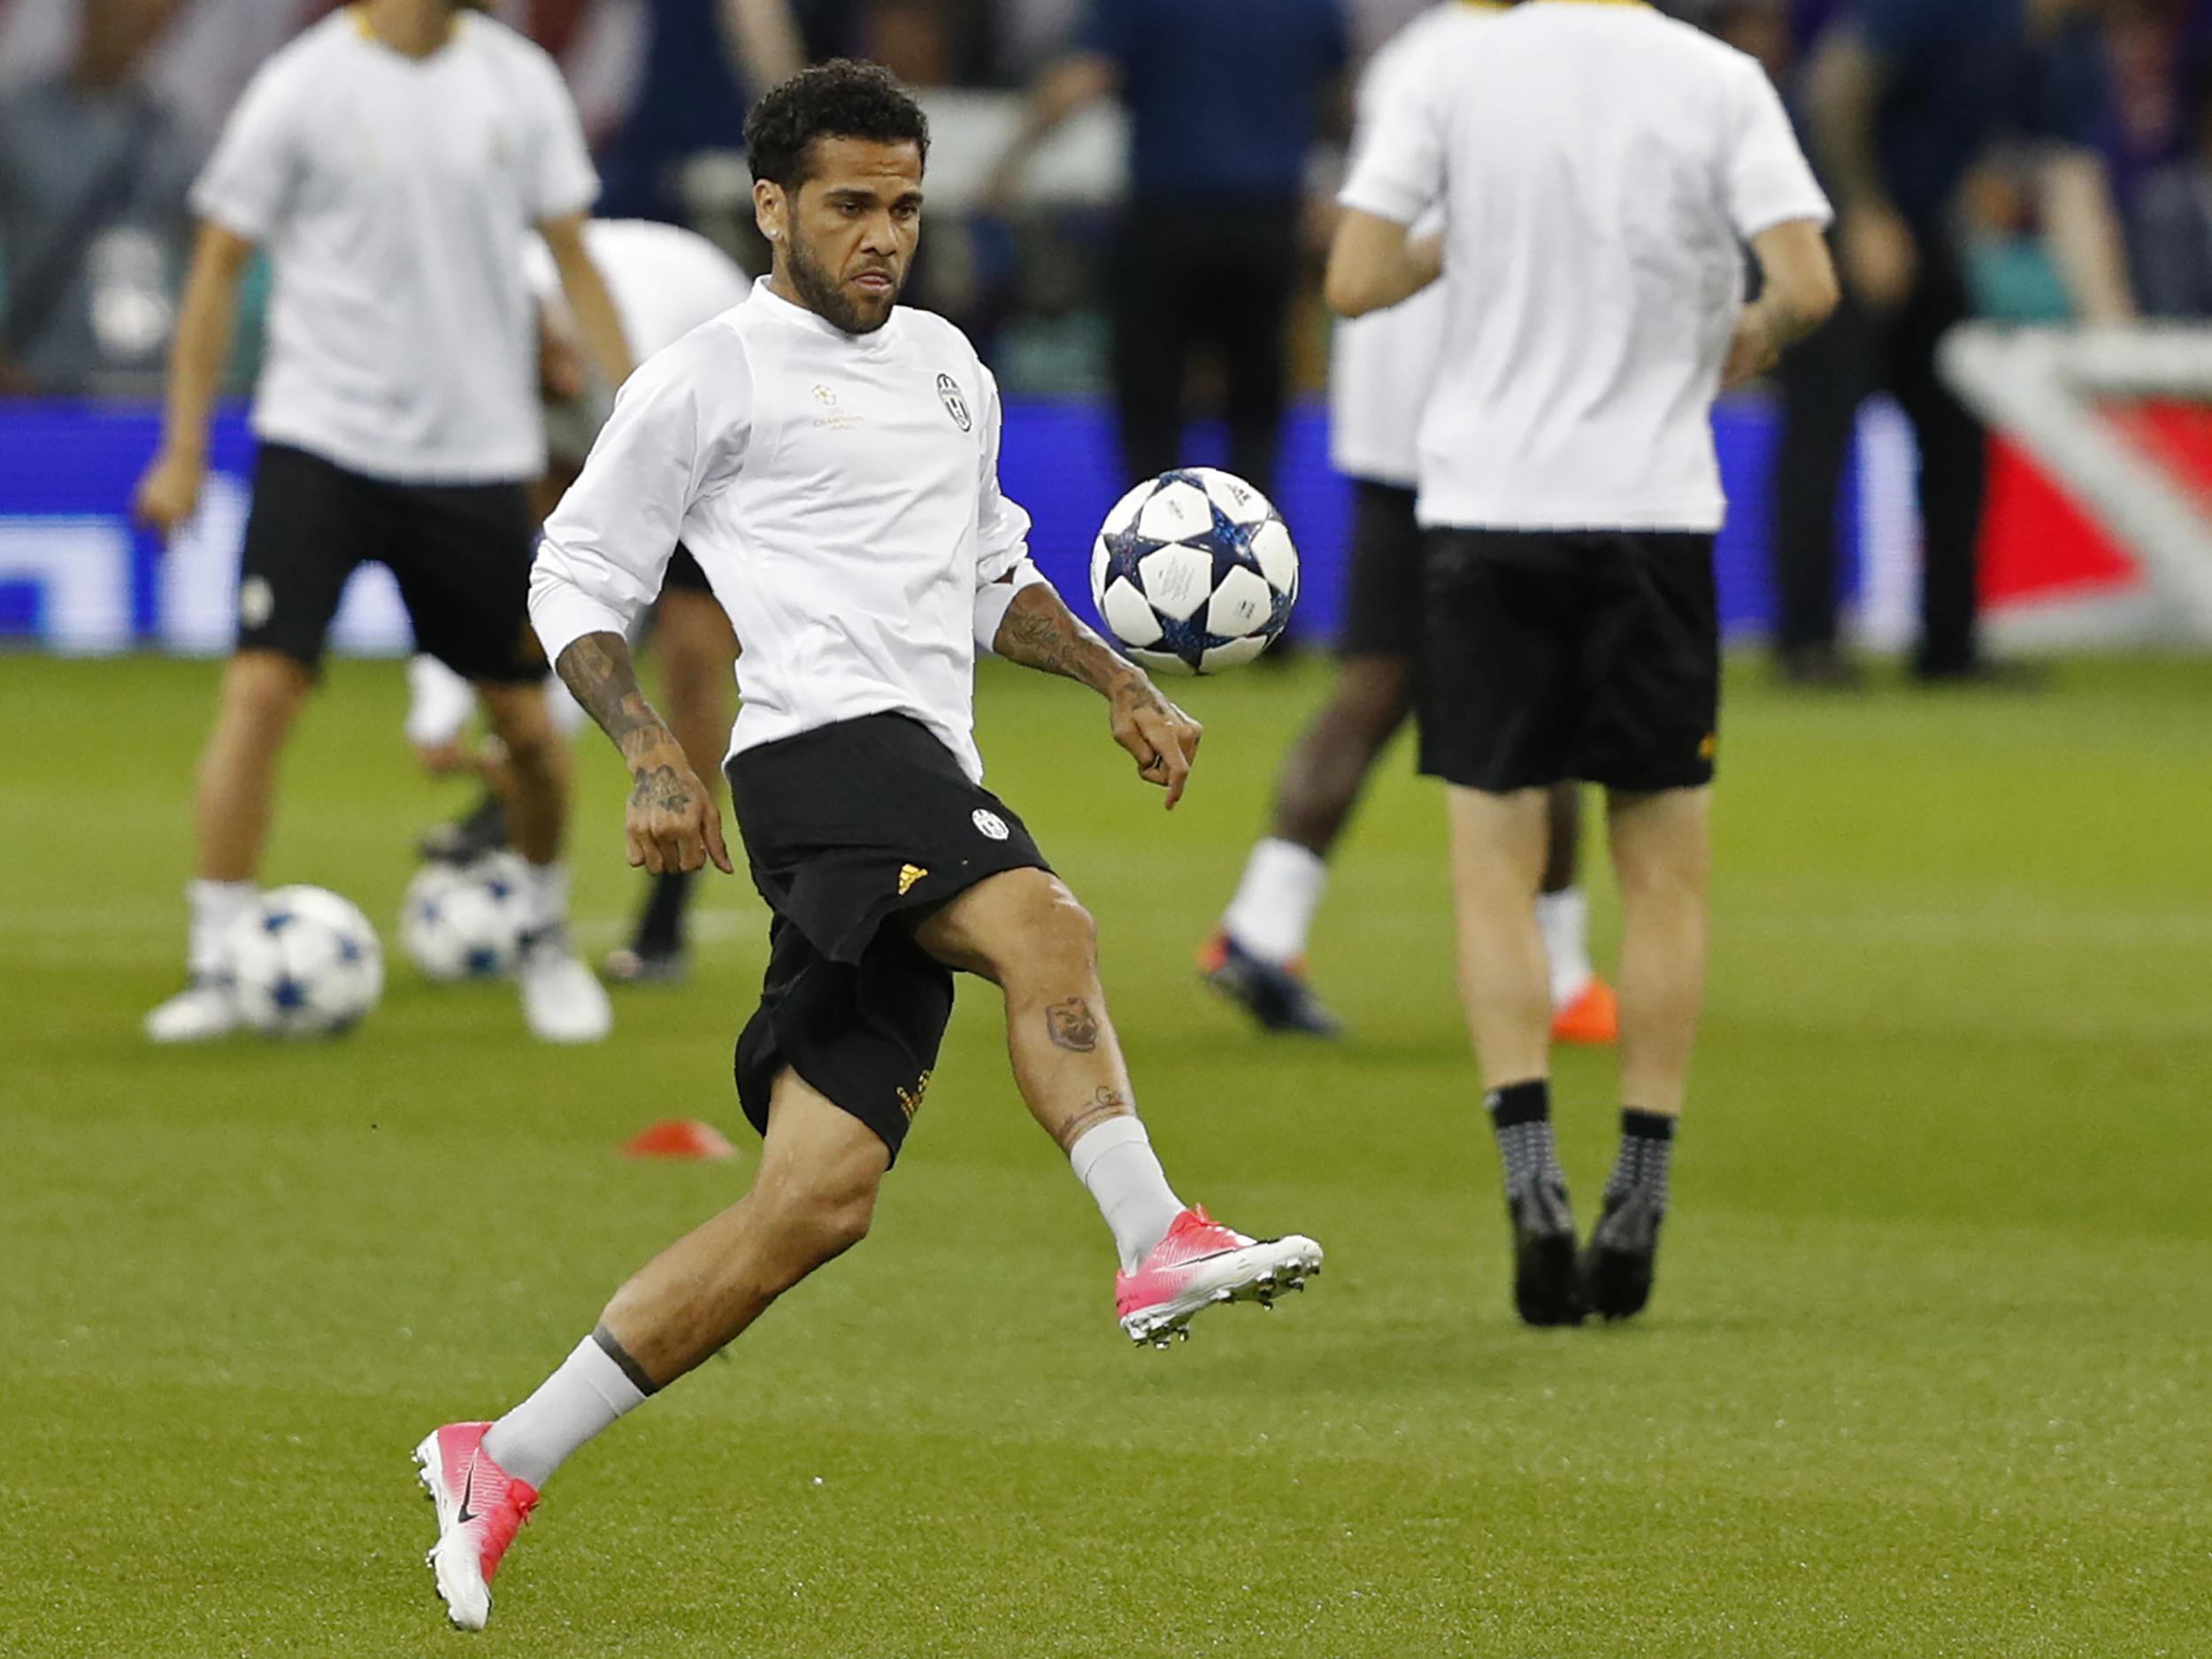 Dani Alves has been in superb form for Juventus